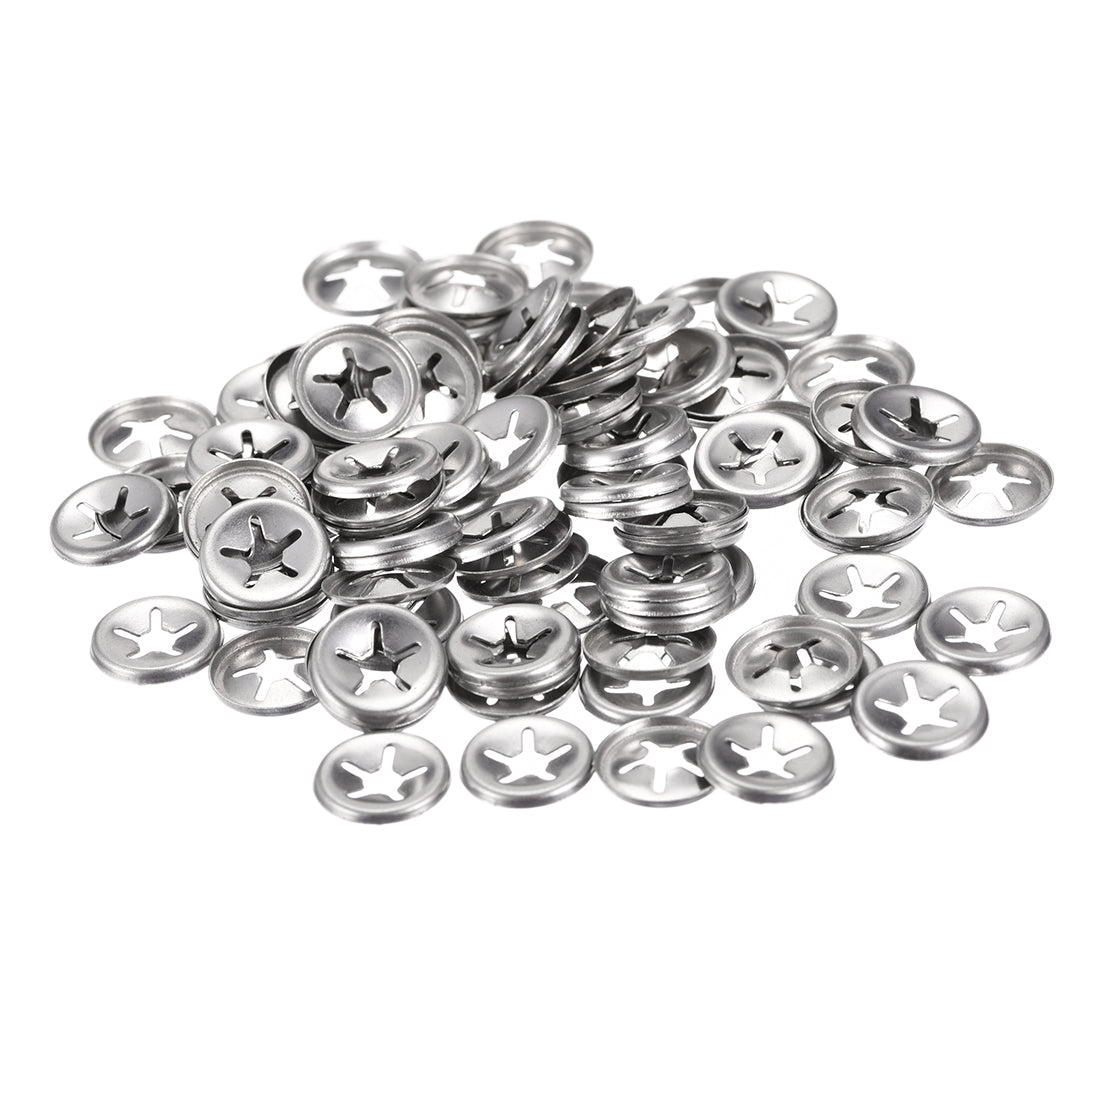 uxcell Uxcell M4 Internal Tooth Star Locking Washer 3.3mm I.D. 12mm O.D. Lock Washers Push On Locking Speed Clip, 304 Stainless Steel 100pcs